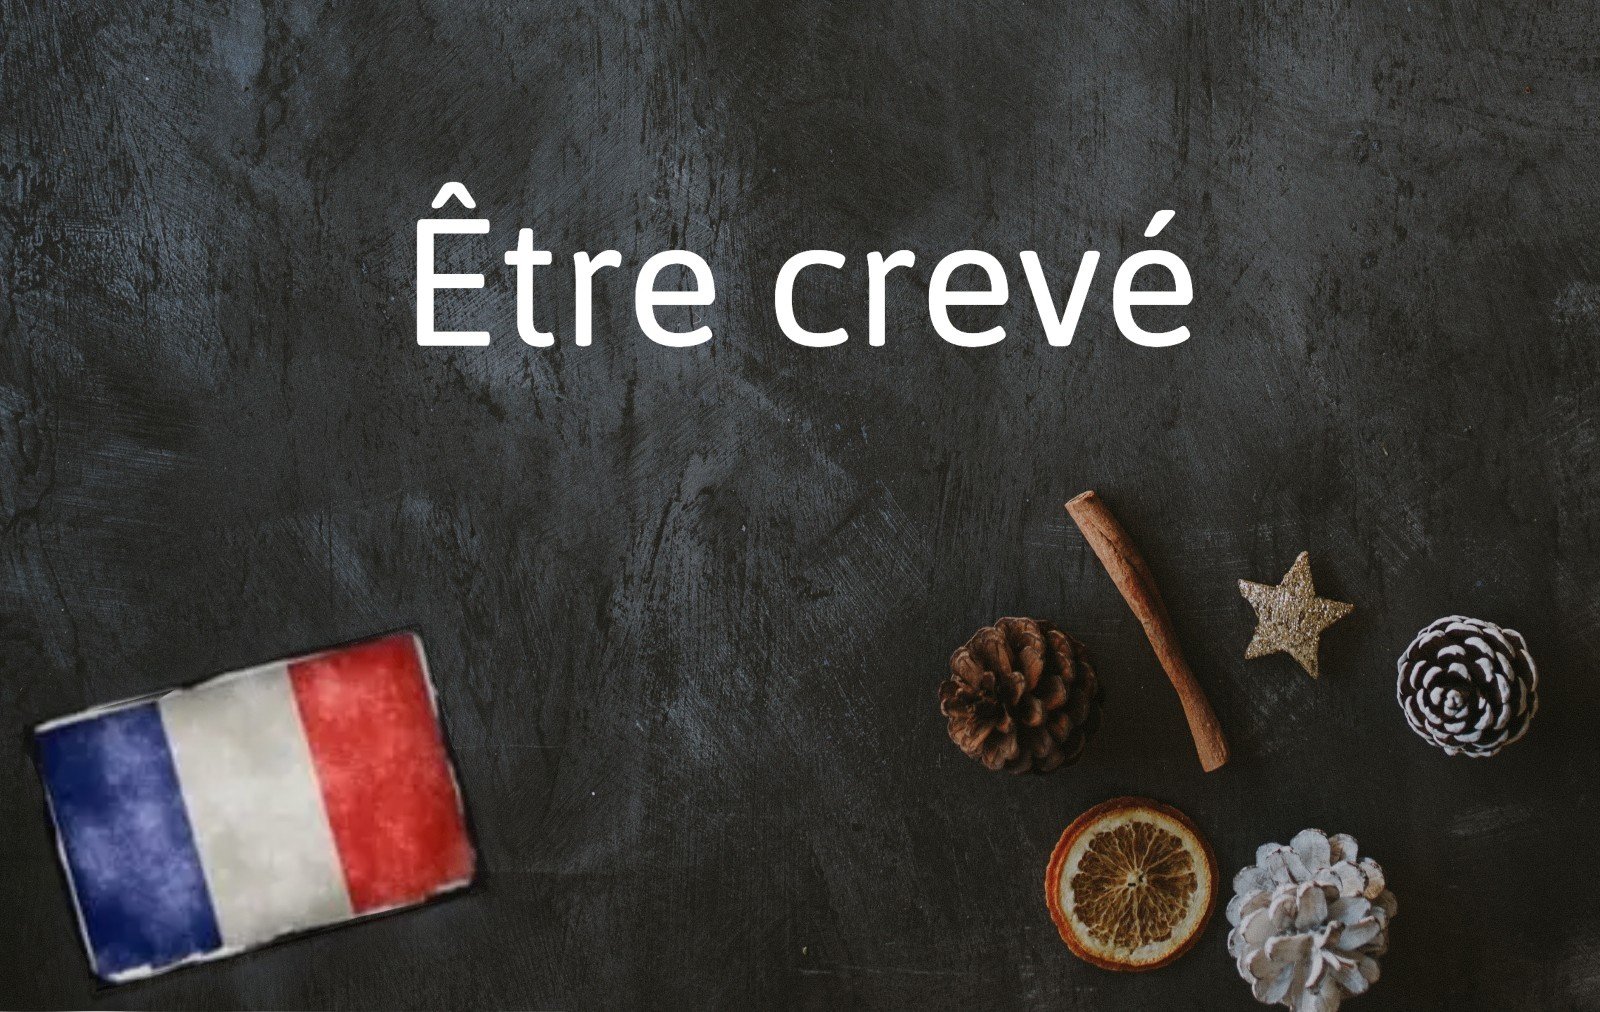 French Expression of the Day: Être crevé